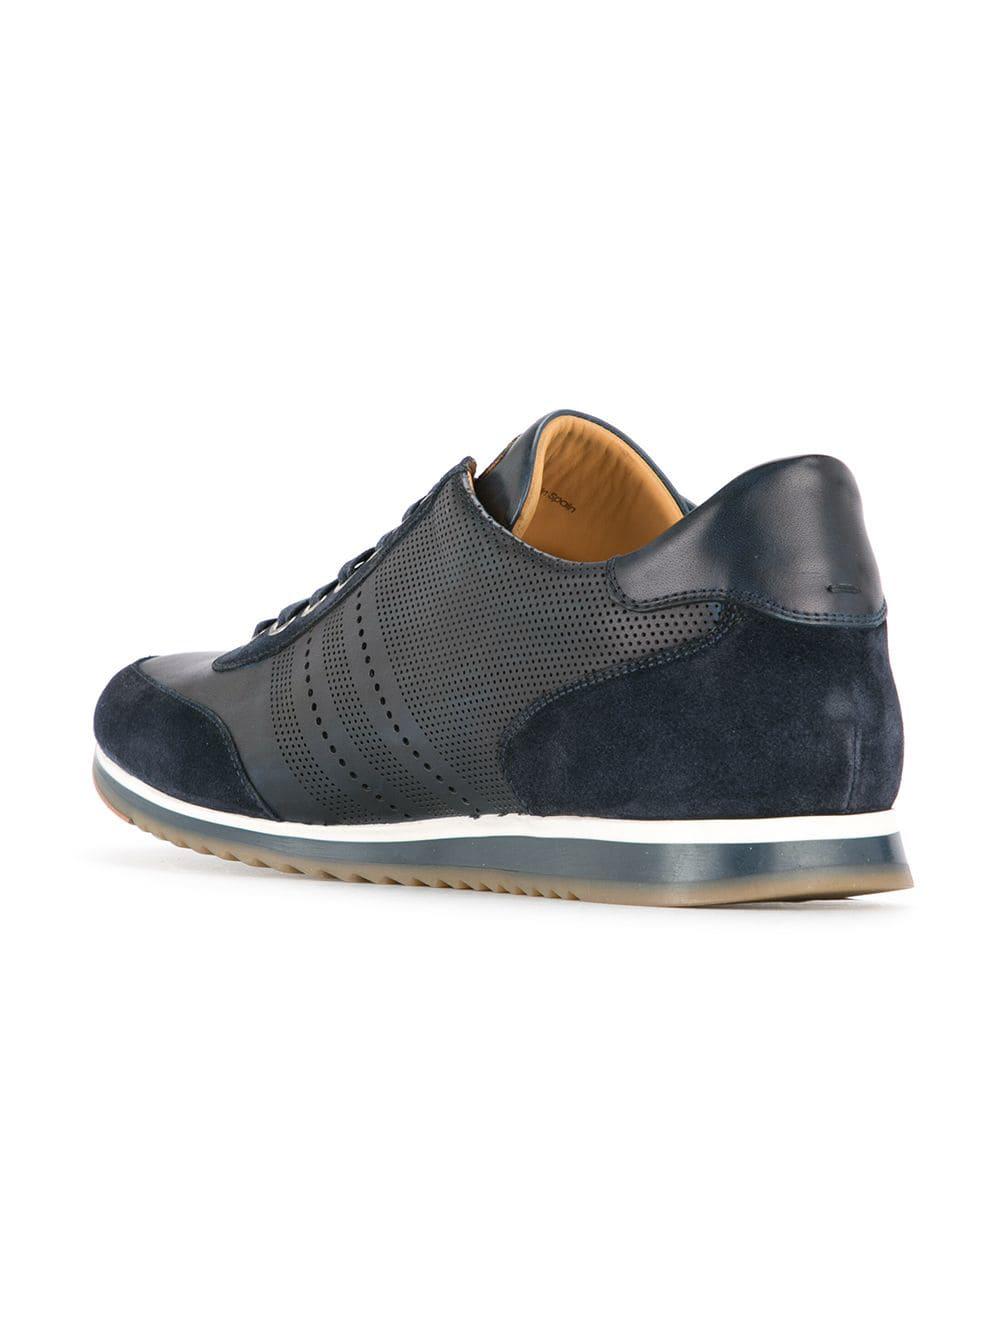 Magnanni Leather Logo Detail Sneakers in Blue for Men - Lyst